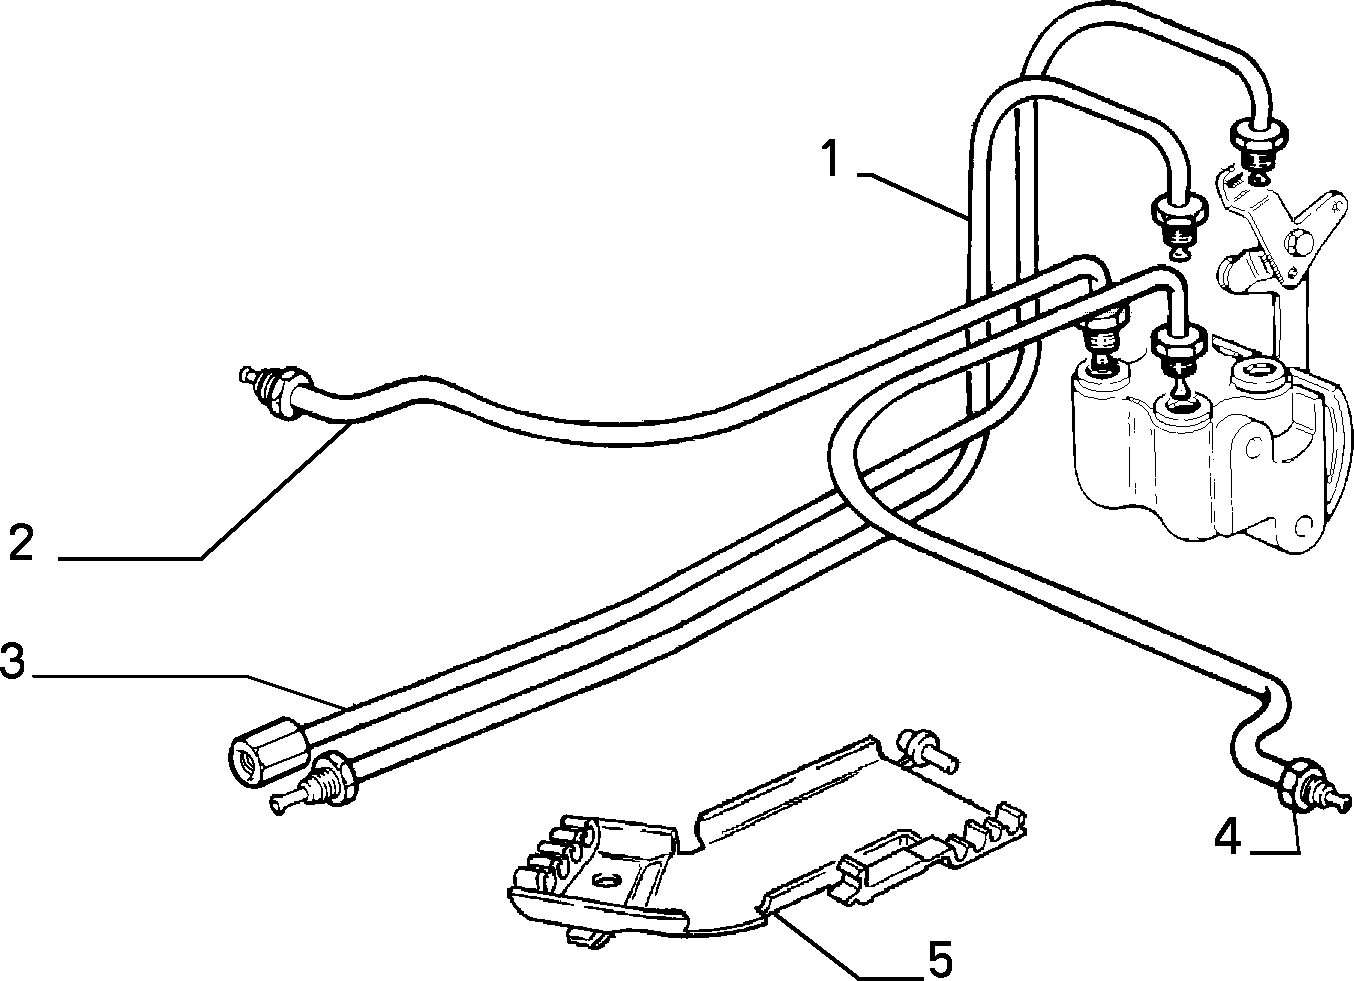 HYDRAULIC BRAKE CONTROL WITH ANTISKID pour Fiat COUPE COUPE' GAMMA'96 (1996 - 2000)